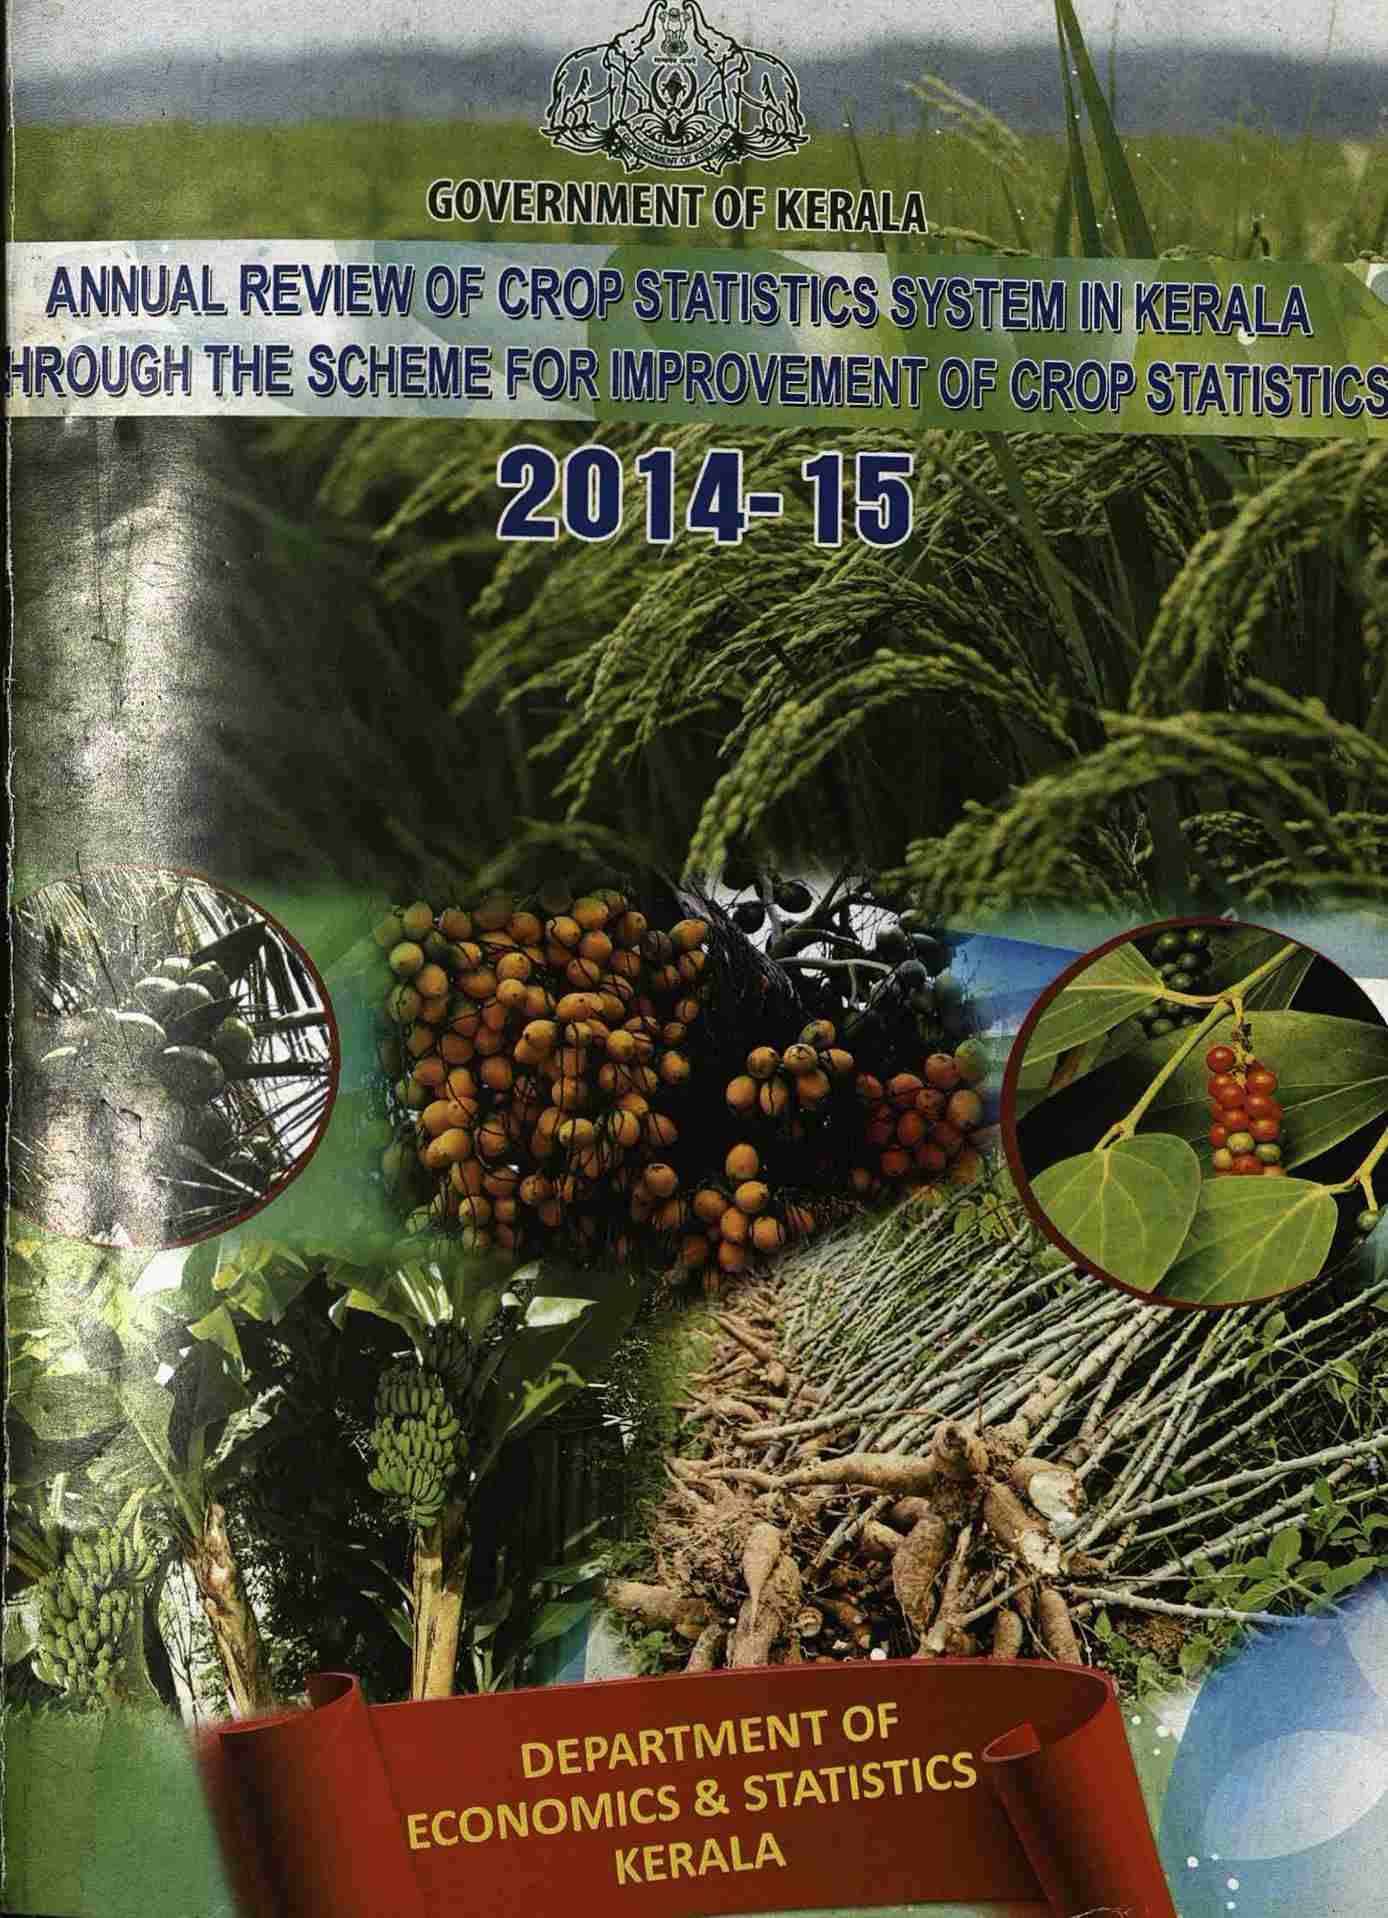 Annual Review of Crop Statistics System in Kerala through the scheme for improvement of Crop Statistics 2014-15